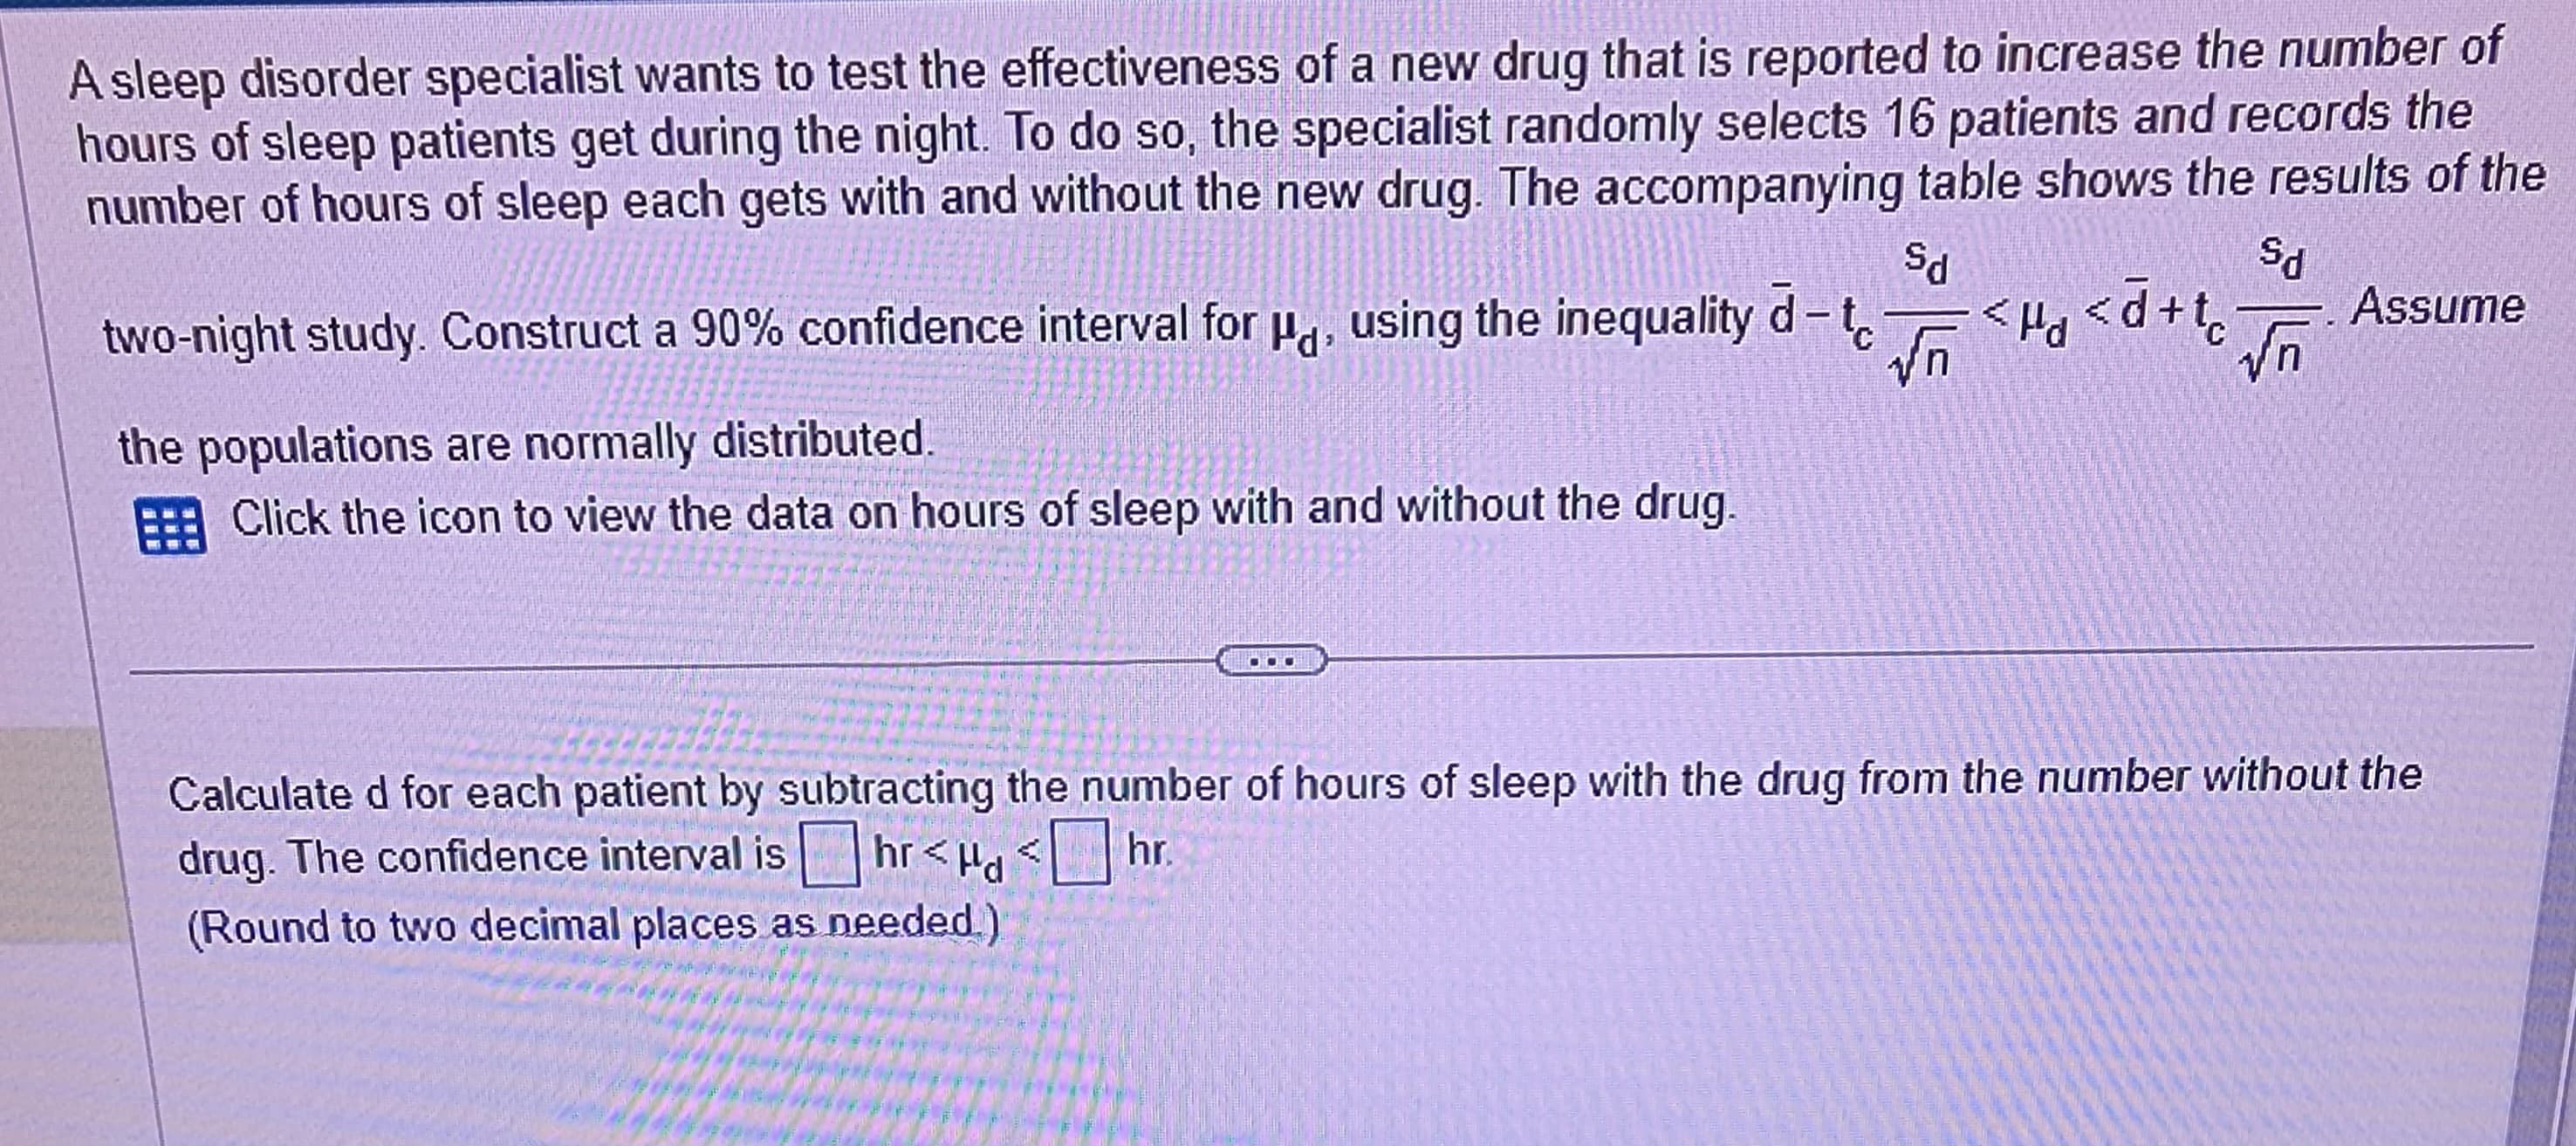 A sleep disorder specialist wants to test the effectiveness of a new drug that is reported to increase the number of
hours of sleep patients get during the night. To do so, the specialist randomly selects 16 patients and records the
number of hours of sleep each gets with and without the new drug. The accompanying table shows the results of the
Sd
ઉત
two-night study. Construct a 90% confidence interval for μ, using the inequality d-t√<d<d+tc. √n
the populations are normally distributed.
Click the icon to view the data on hours of sleep with and without the drug.
DOO
Assume
Calculated for each patient by subtracting the number of hours of sleep with the drug from the number without the
drug. The confidence interval is
hr<<hr.
(Round to two decimal places as needed.)